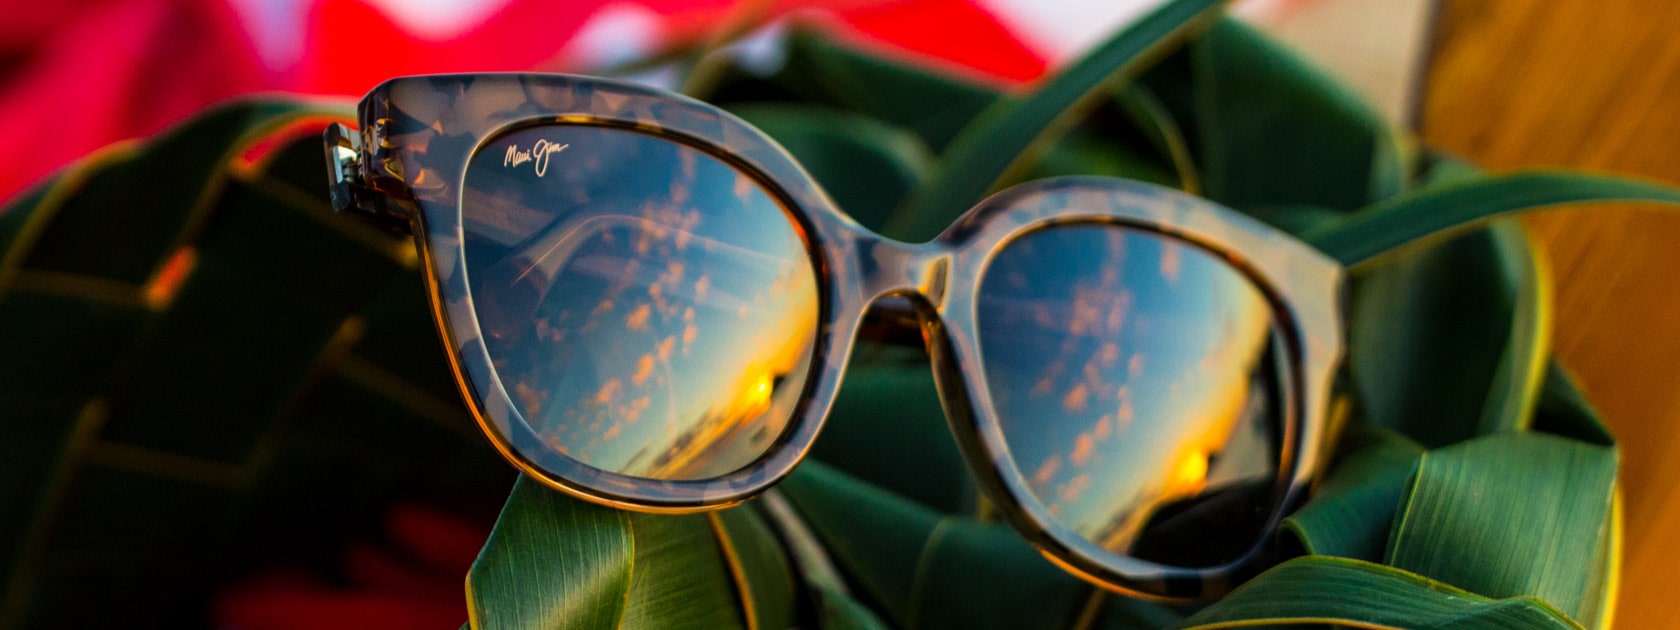 tortoise frame sunglasses with sky reflection on lenses displayed over green leaves